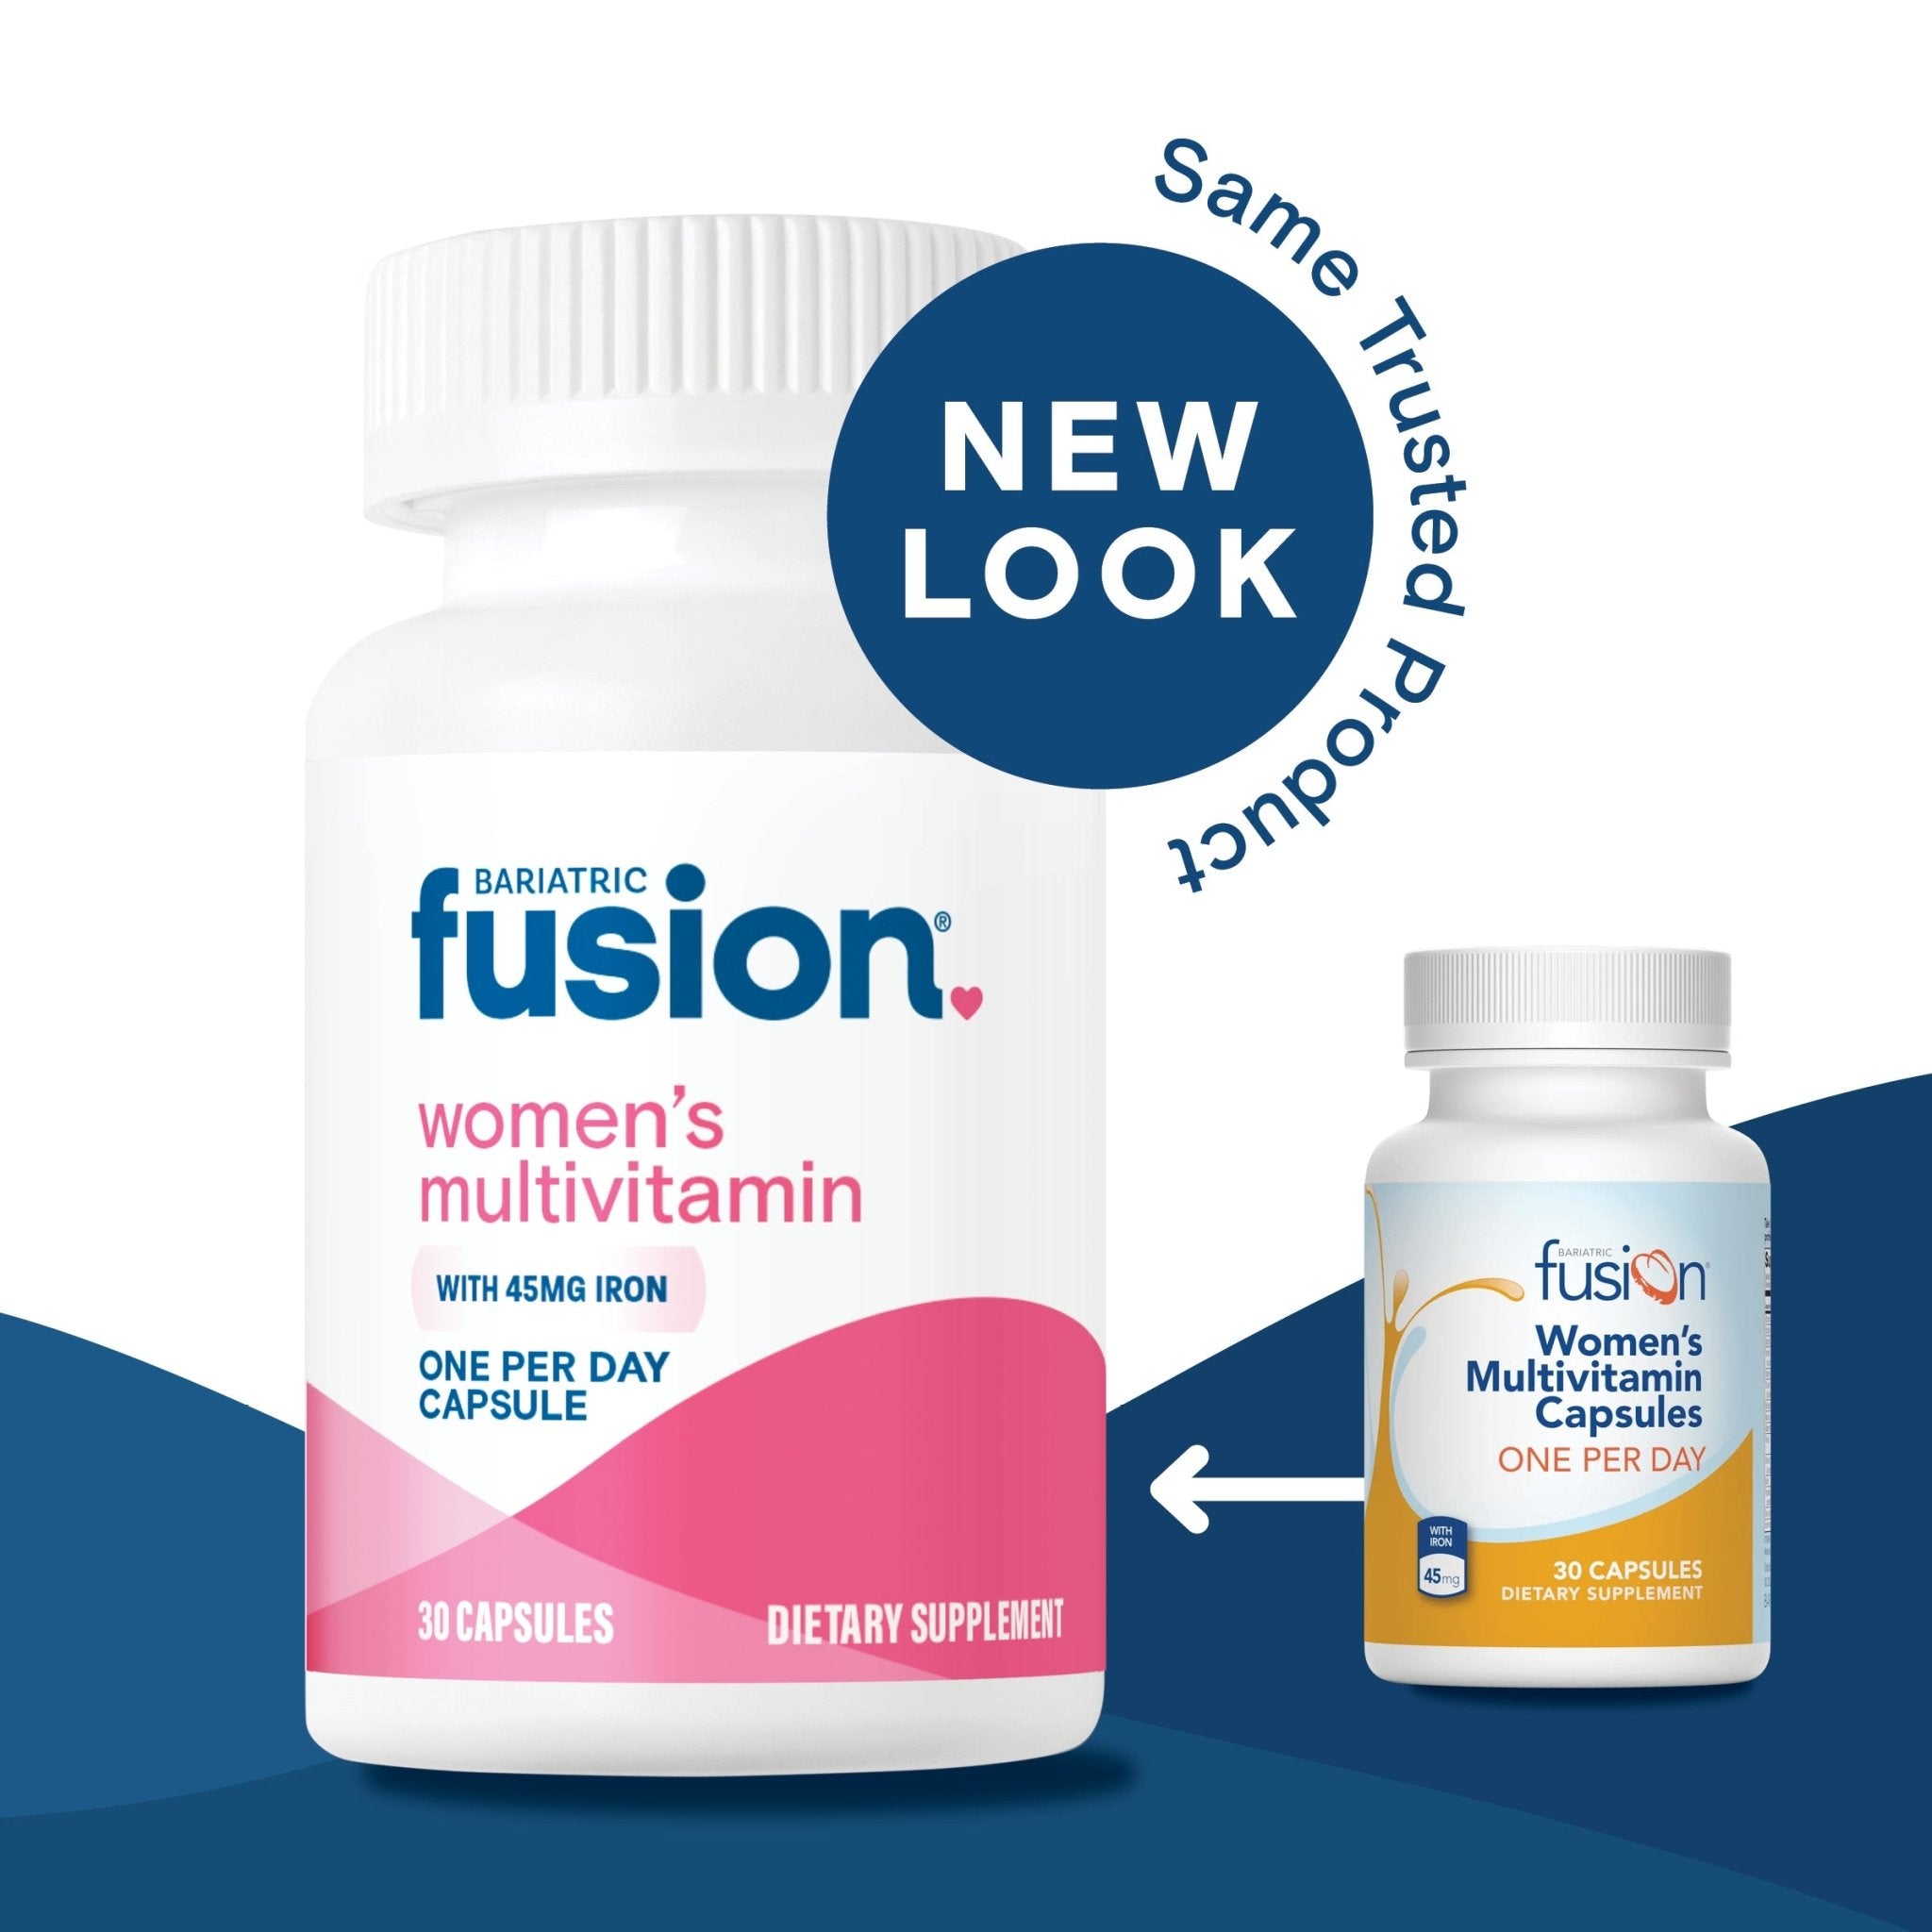 Women’s One Per Day Multivitamin With Iron 30 capsules new look, same trusted product.